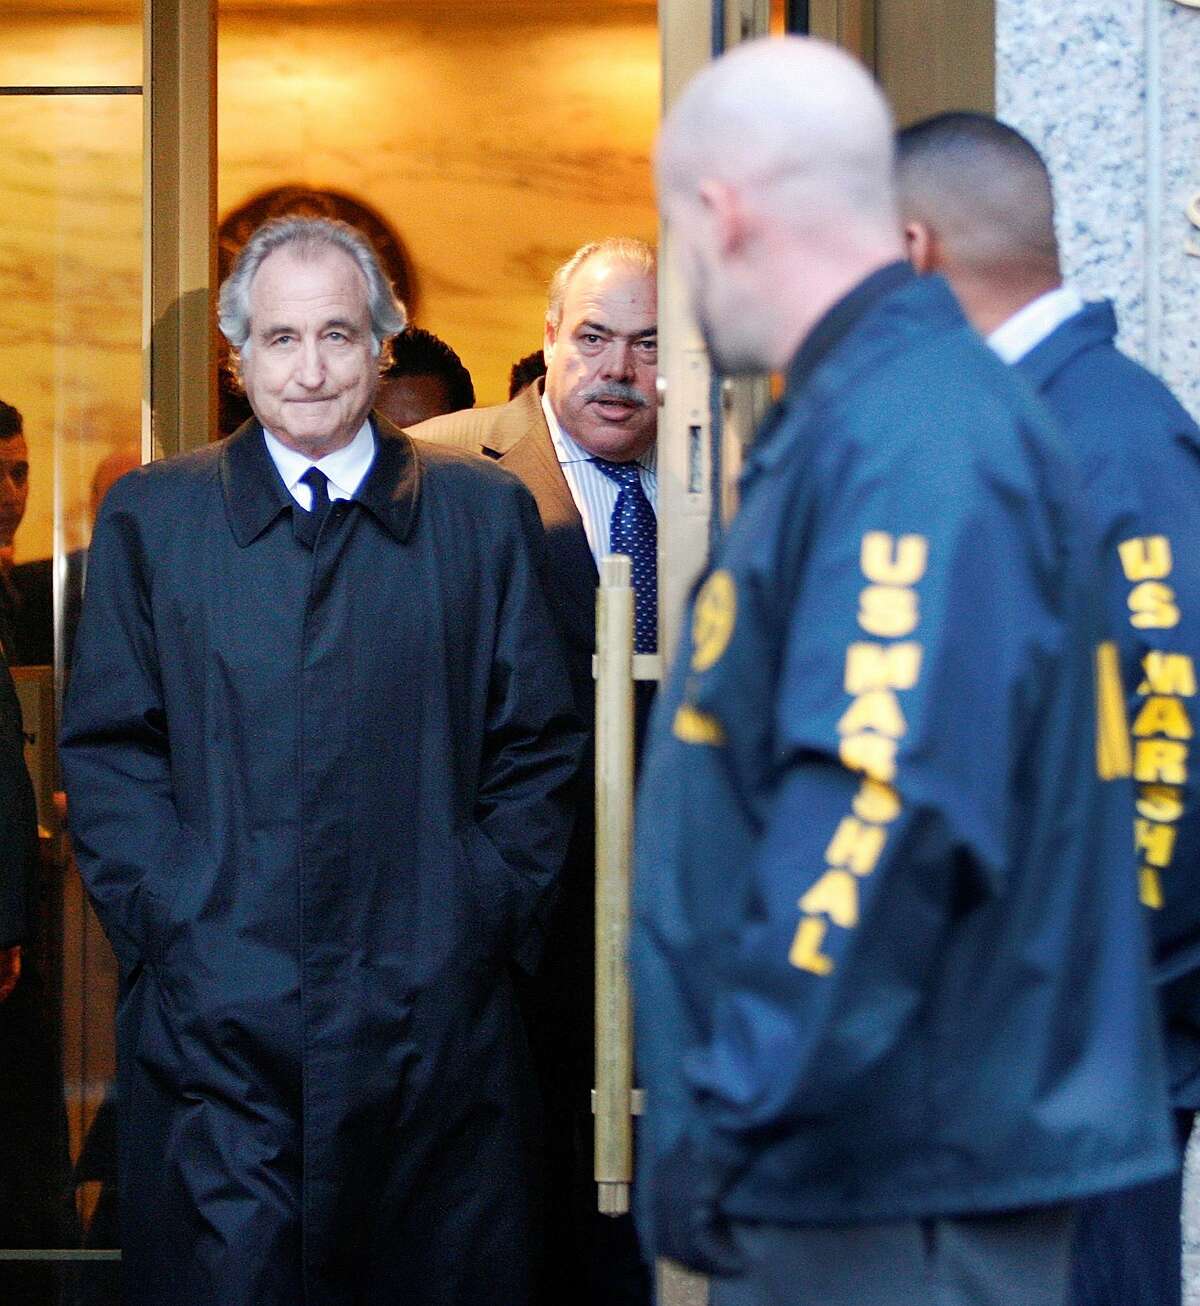 Disgraced financier Bernard Madoff leaves U.S. District Court in Manhattan after a bail hearing in New York, Monday, Jan. 5, 2009. A hedge fund manager linked to Madoff’s crimes died Monday in an apparent suicide.